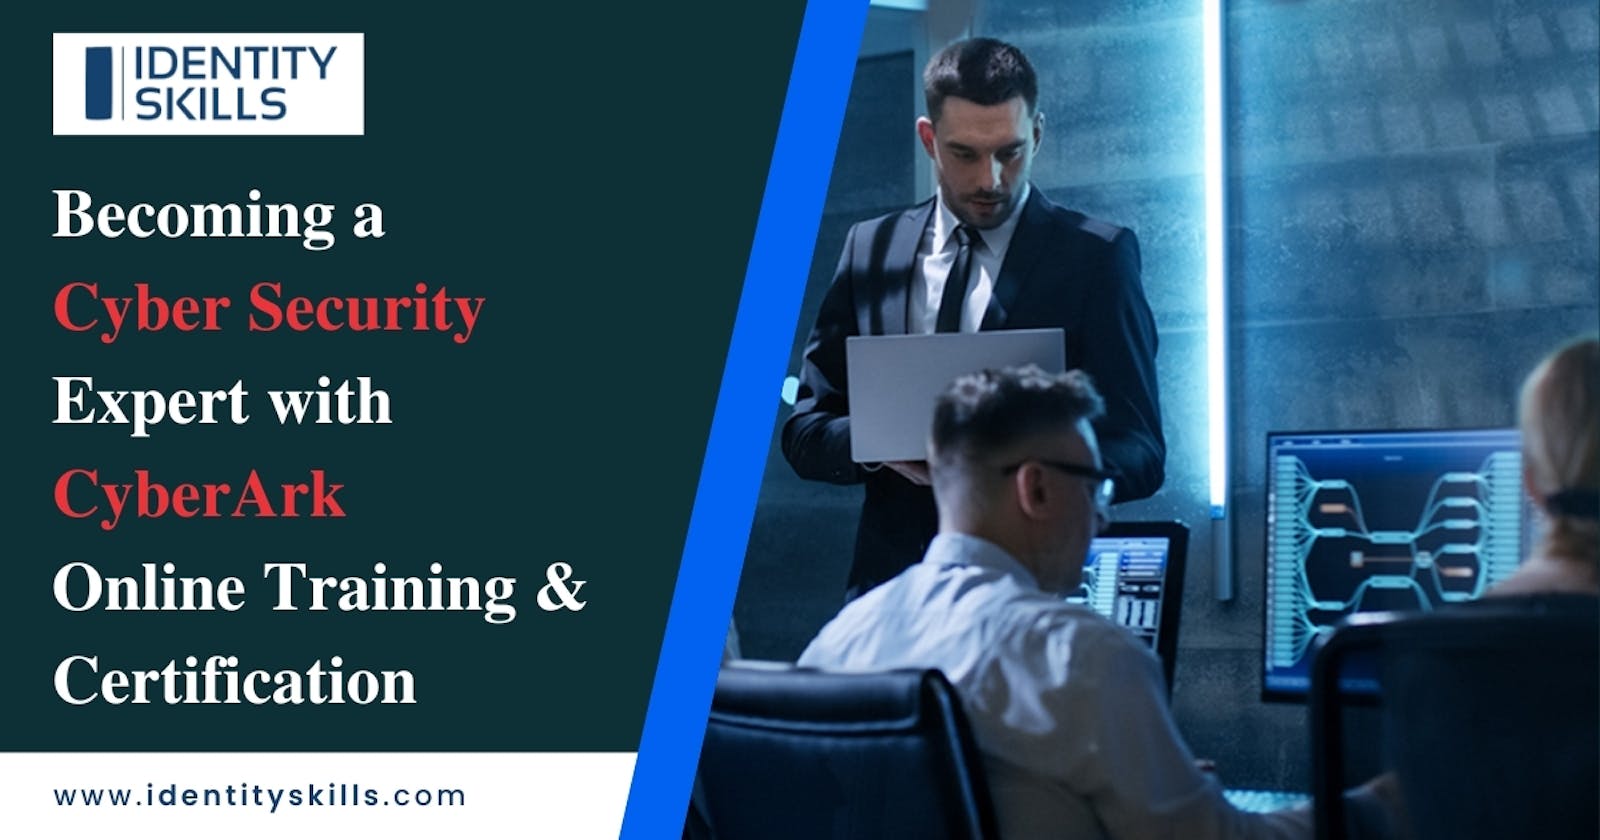 Becoming a Cyber Security Expert with CyberArk Online Training & Certification